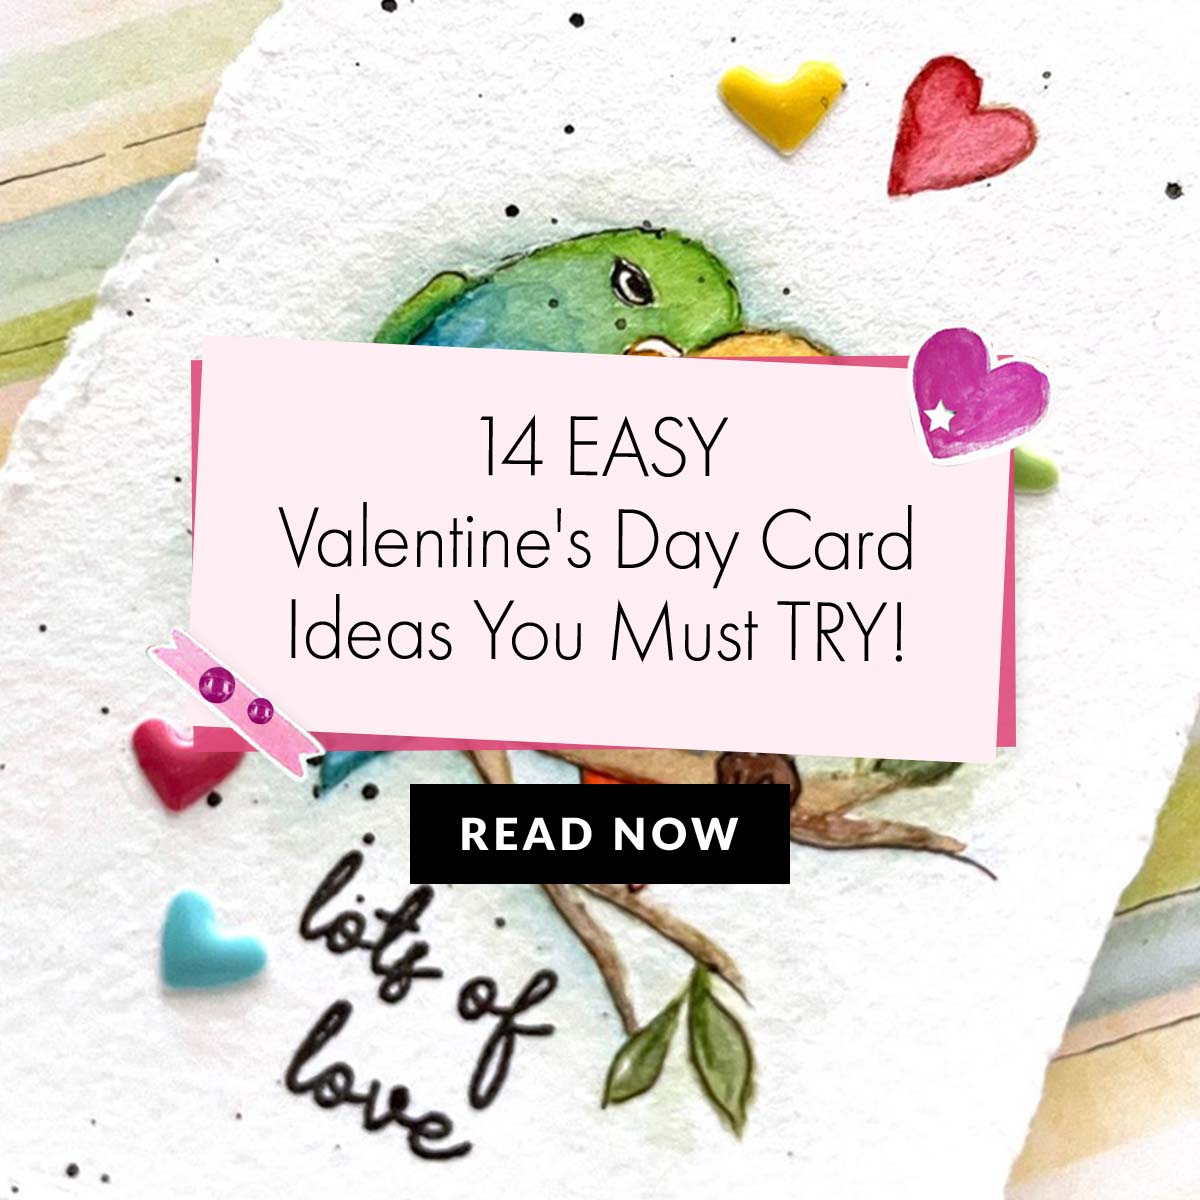 14 Easy Valentine's Day Card Ideas You Can Make in Minutes!